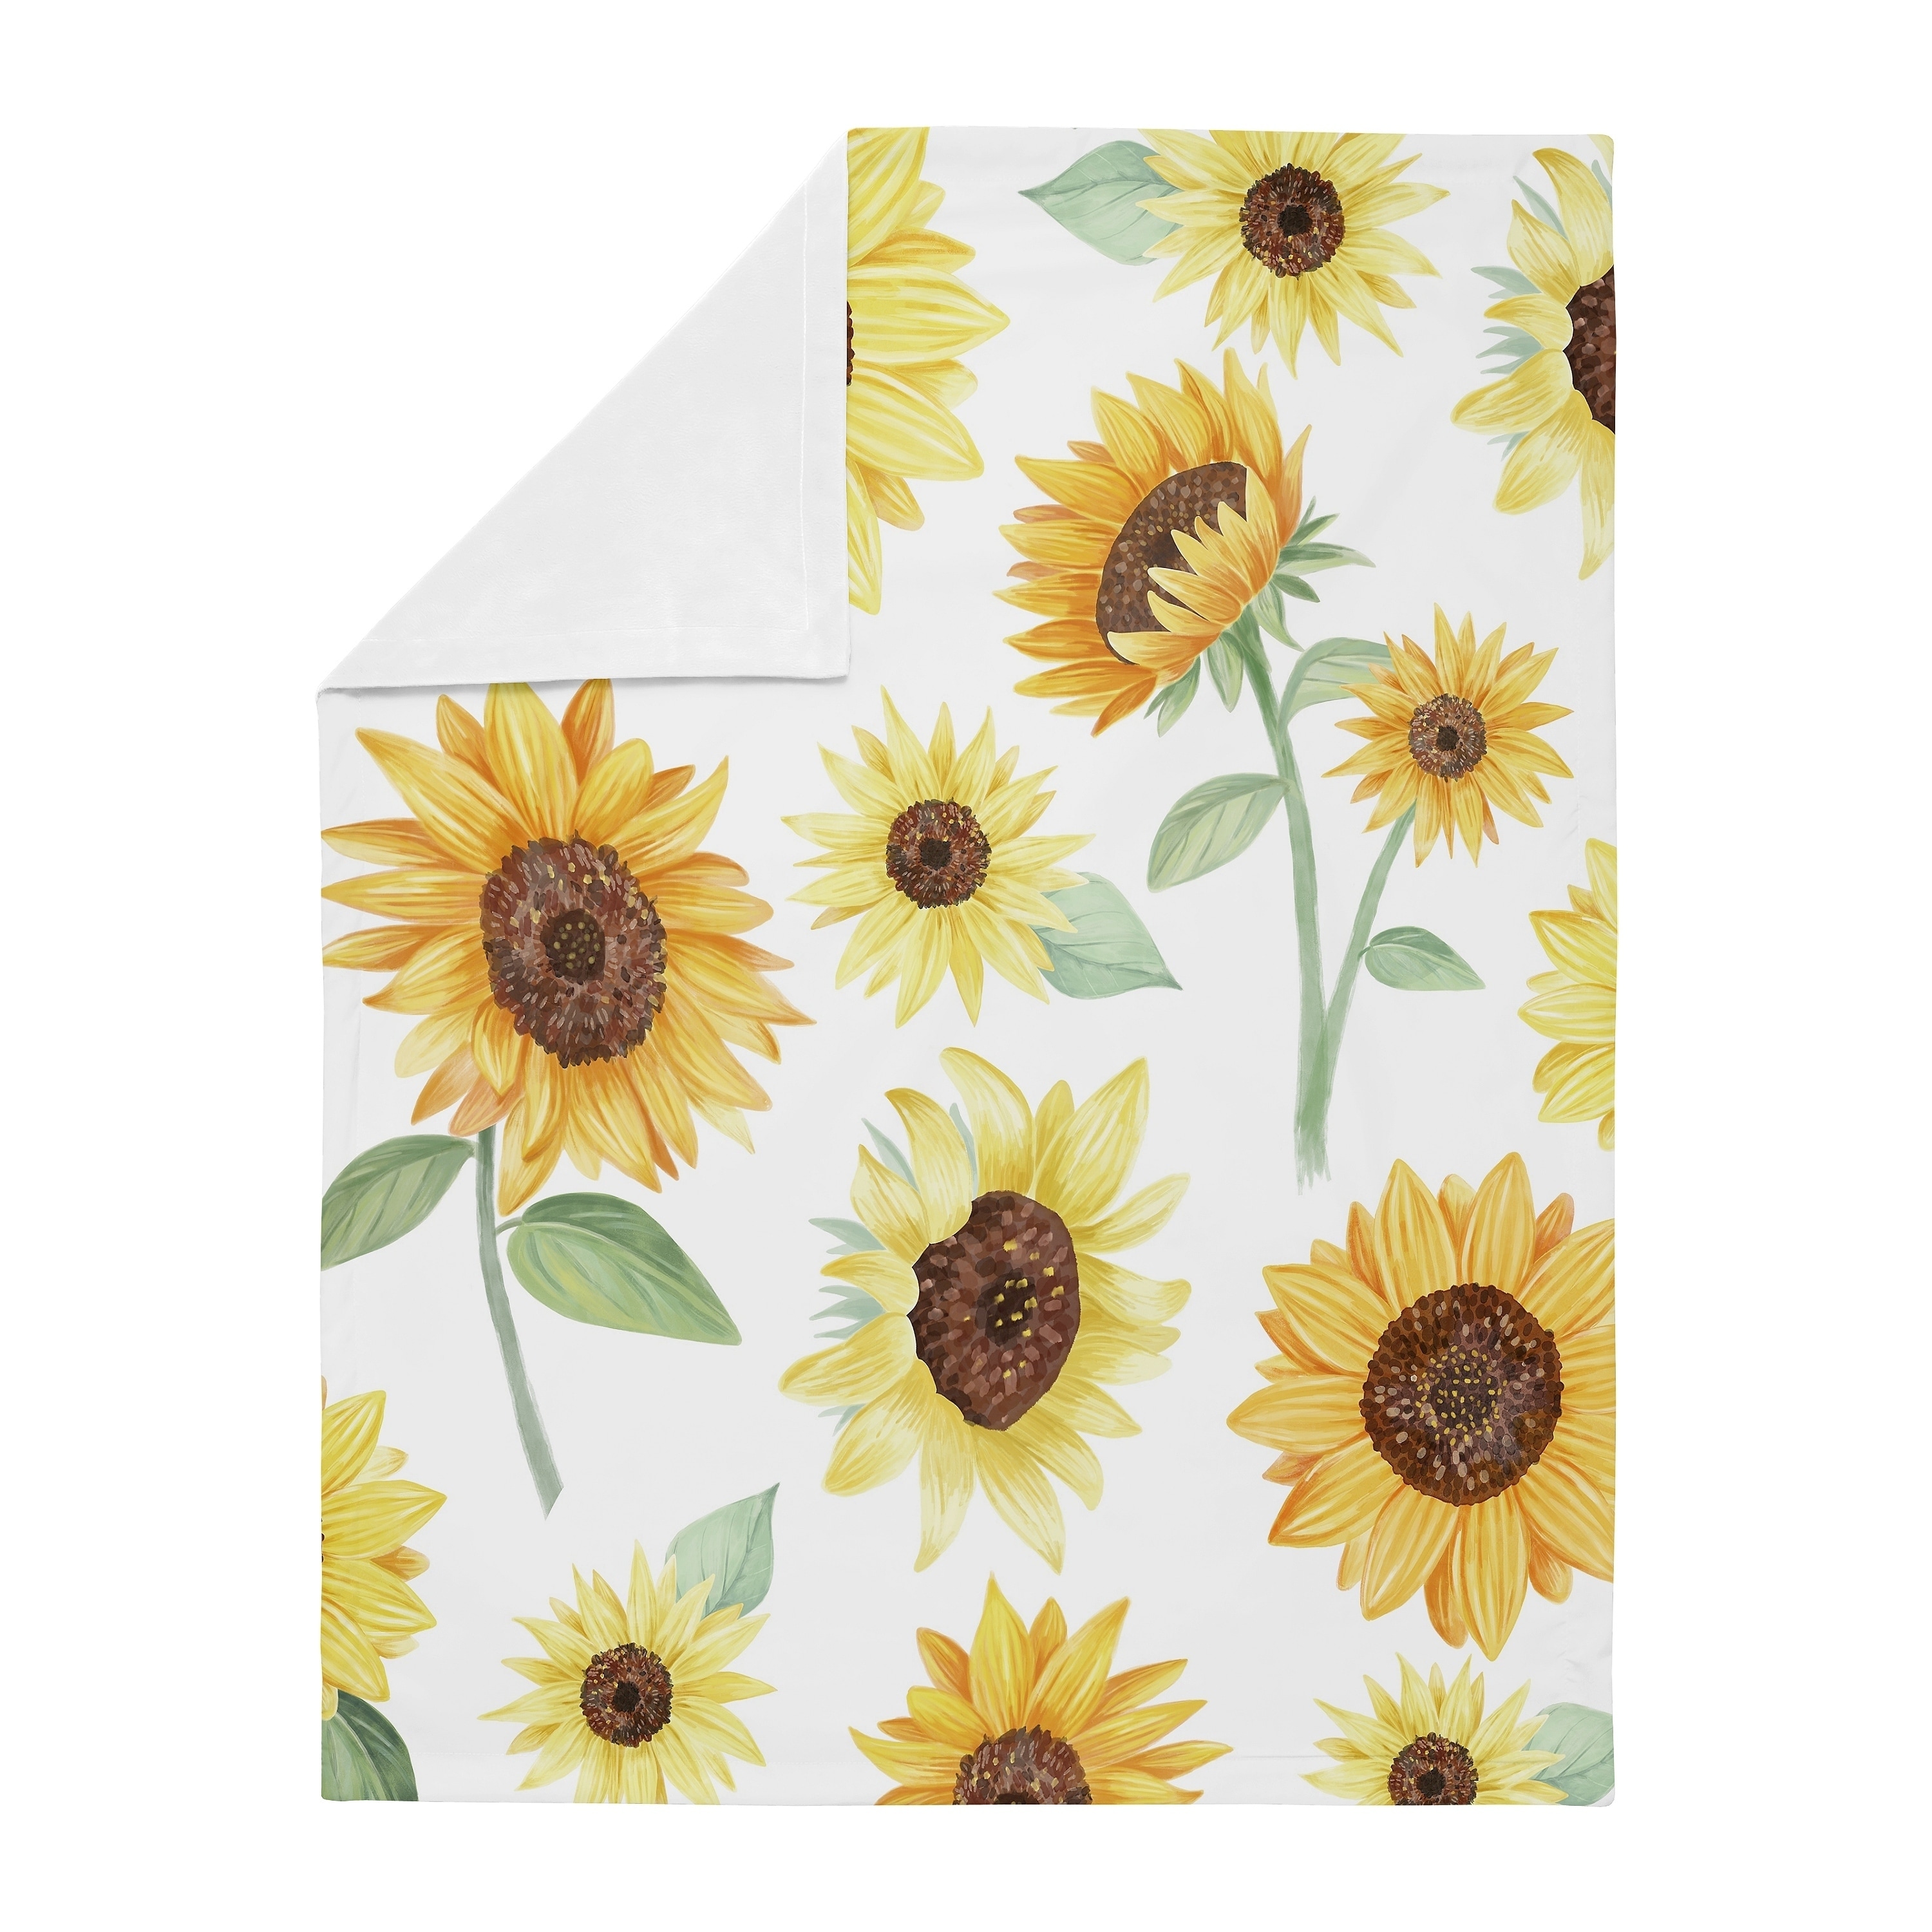 Sunflower Girl Baby Receiving Security Swaddle Blanket - Yellow Green White  Farmhouse Watercolor Flower - Overstock - 30757304